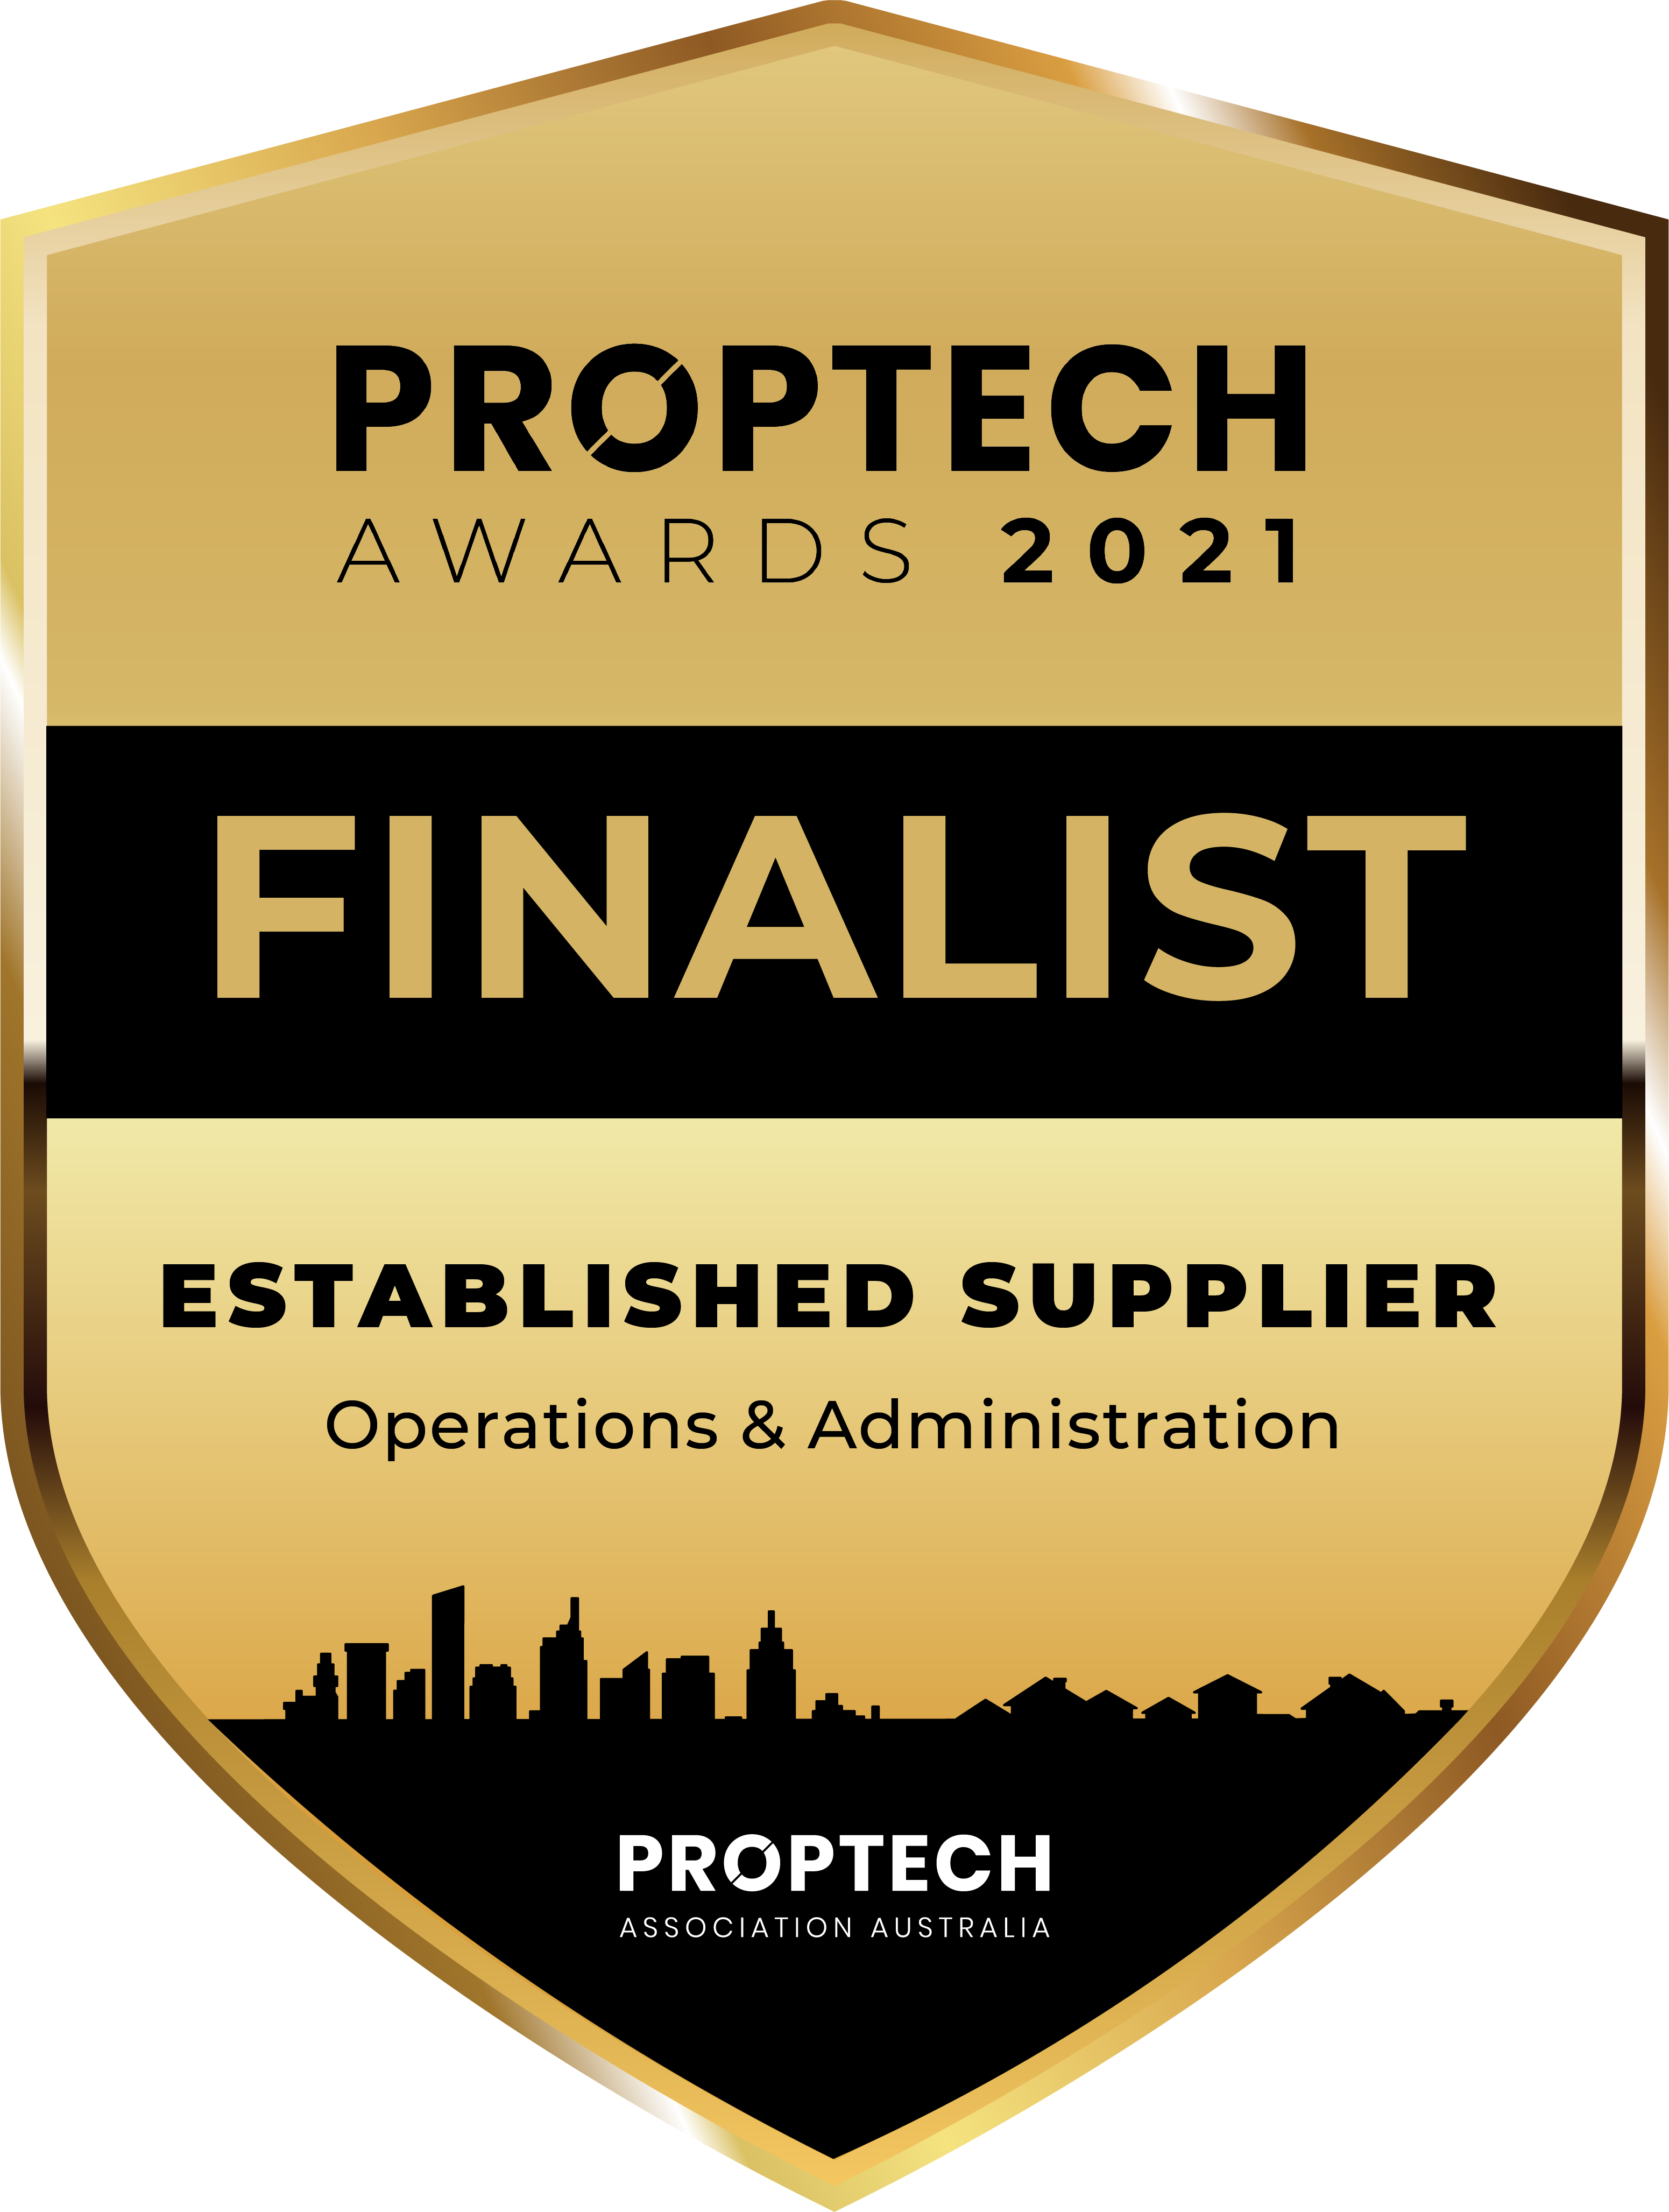 Forms Live was a nominee in the PropTech Awards 2021 for Operations and Administration